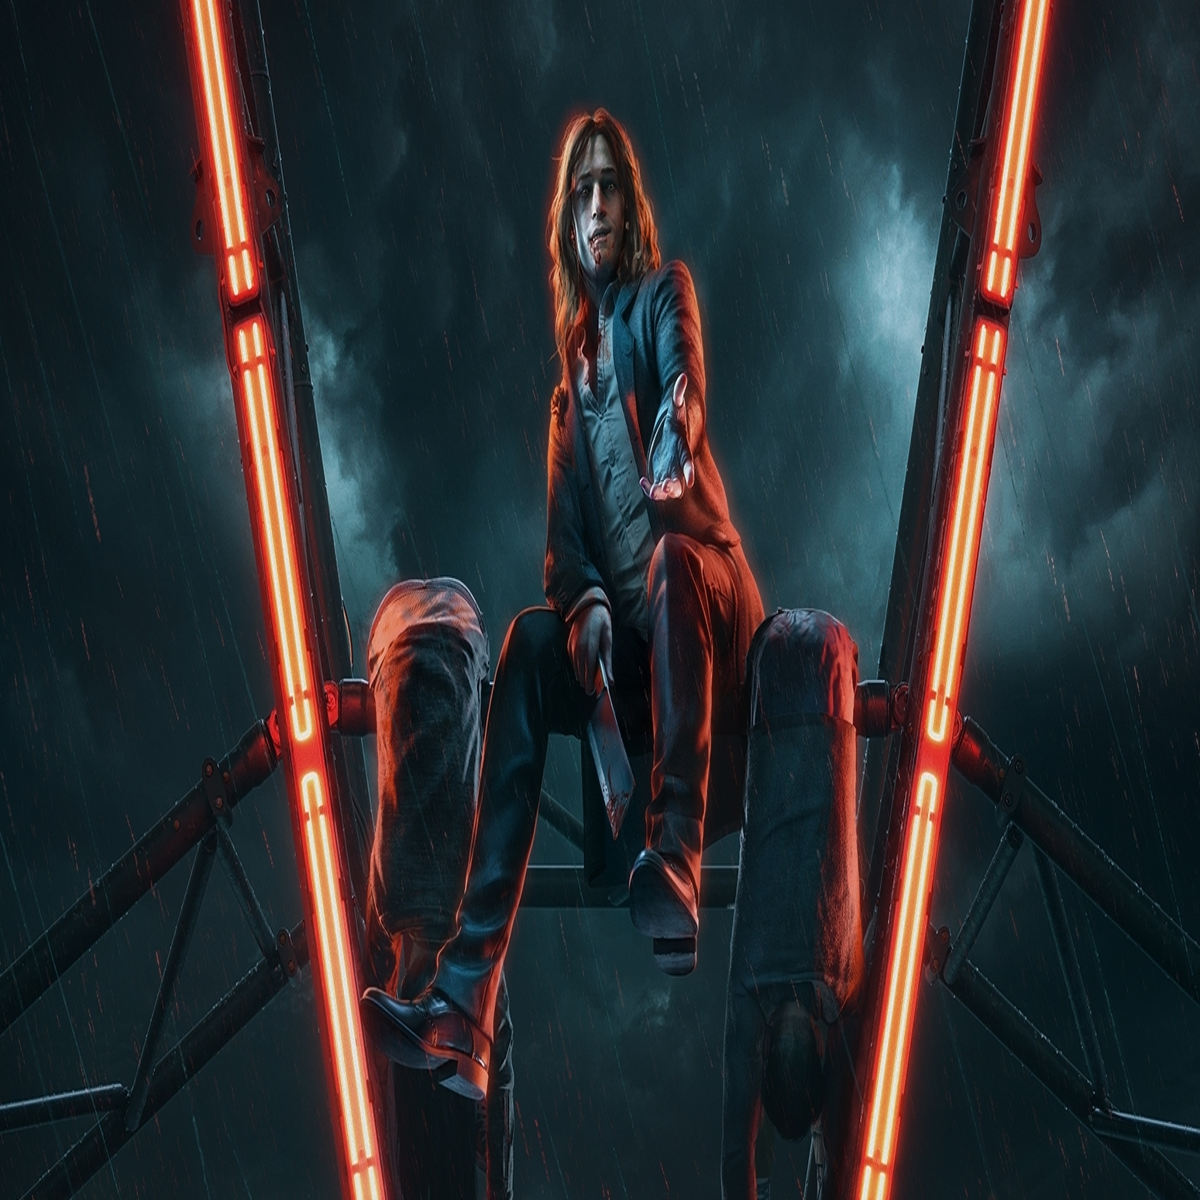 Vampire the Masquerade: Bloodlines 2 was almost canceled after a